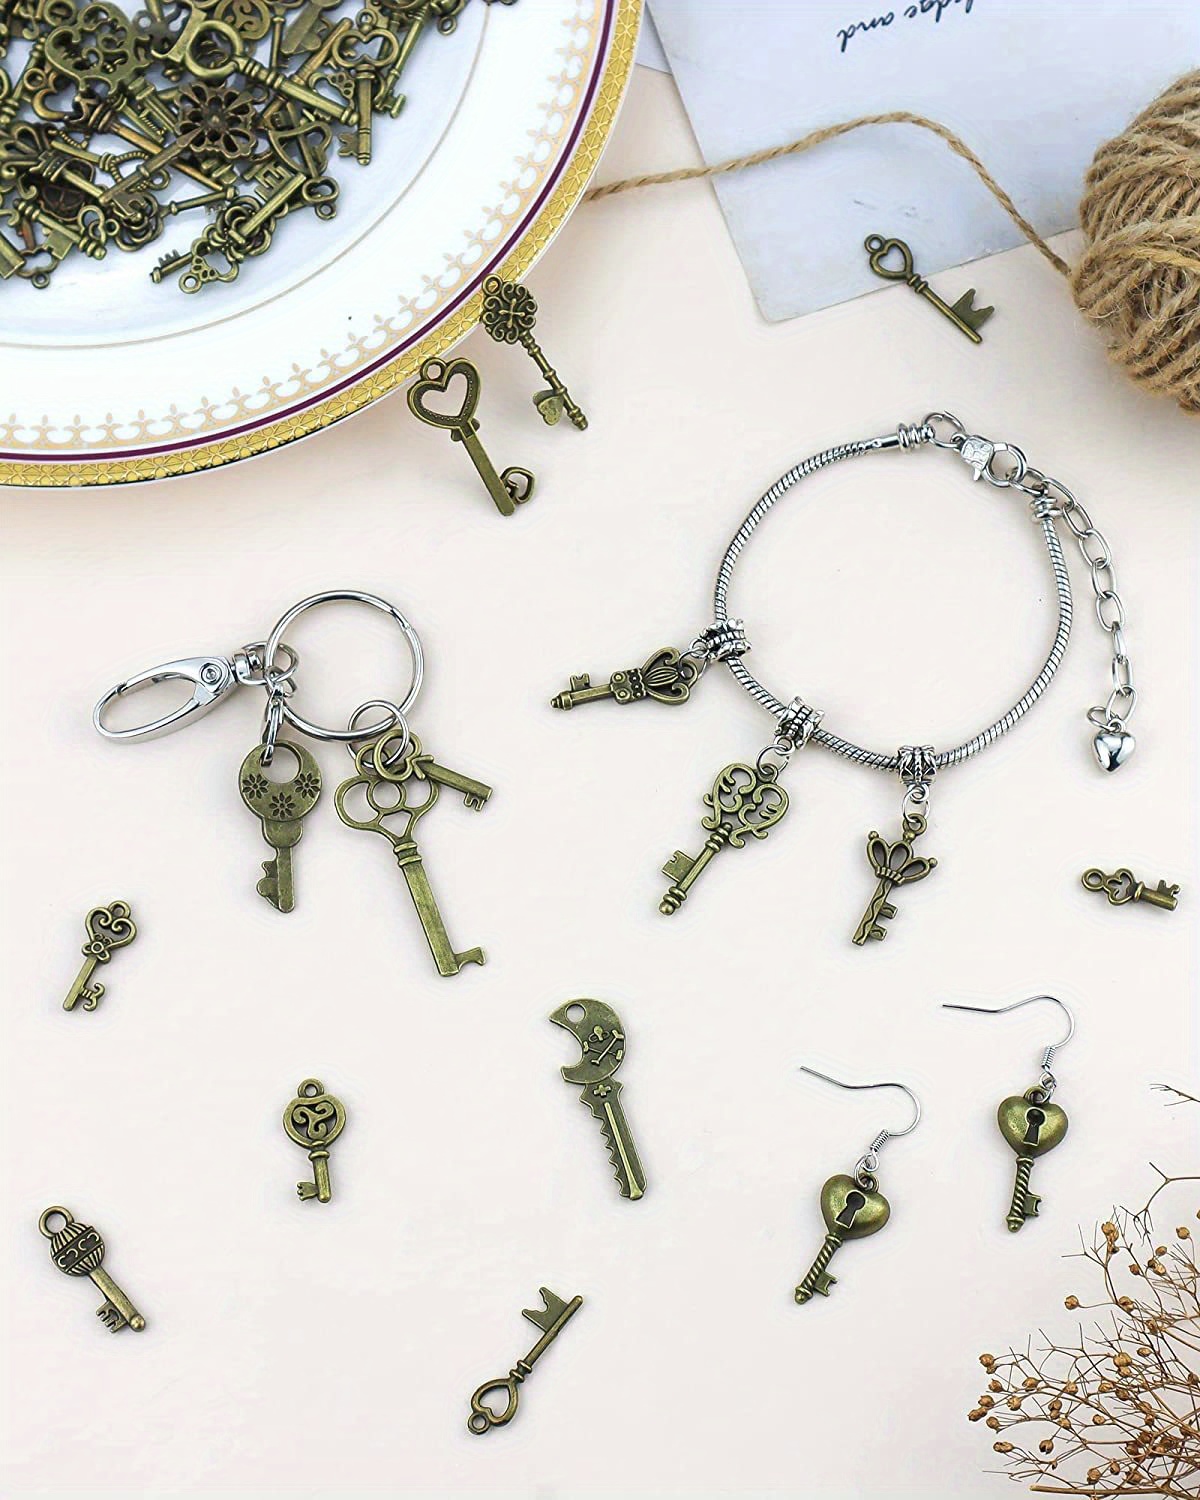  500 Pieces Vintage Skeleton Key Set Charms Mixed Antique Style  Bronze Brass Key Set Charms Collection Kits for Pendant DIY Making Jewelry  Earring Craft Wedding Party Favors Decor : Arts, Crafts